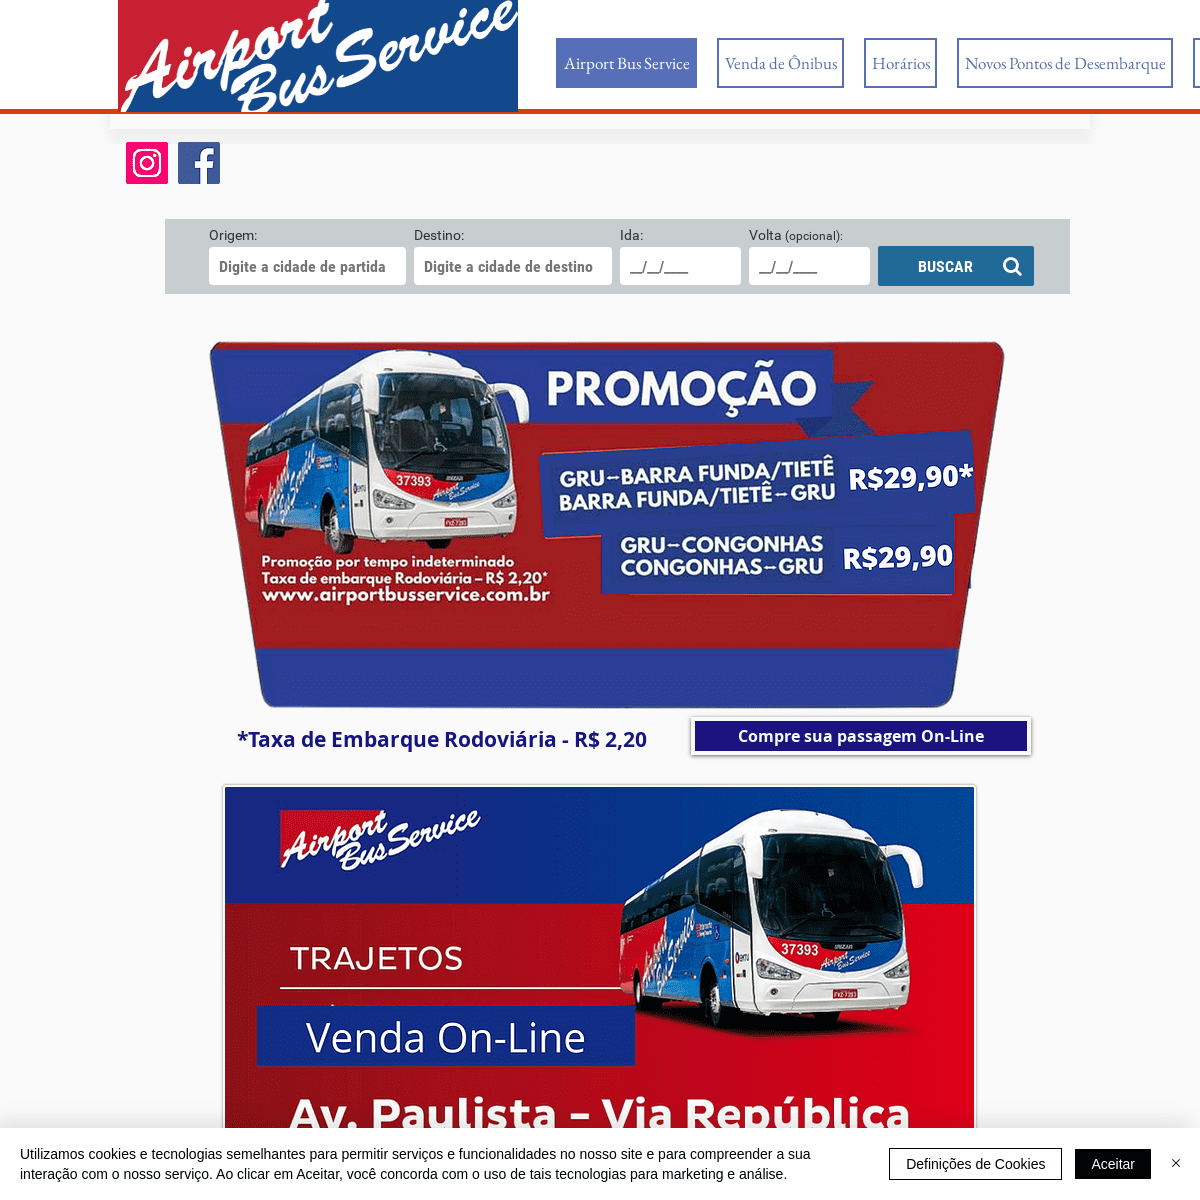 A complete backup of https://airportbusservice.com.br